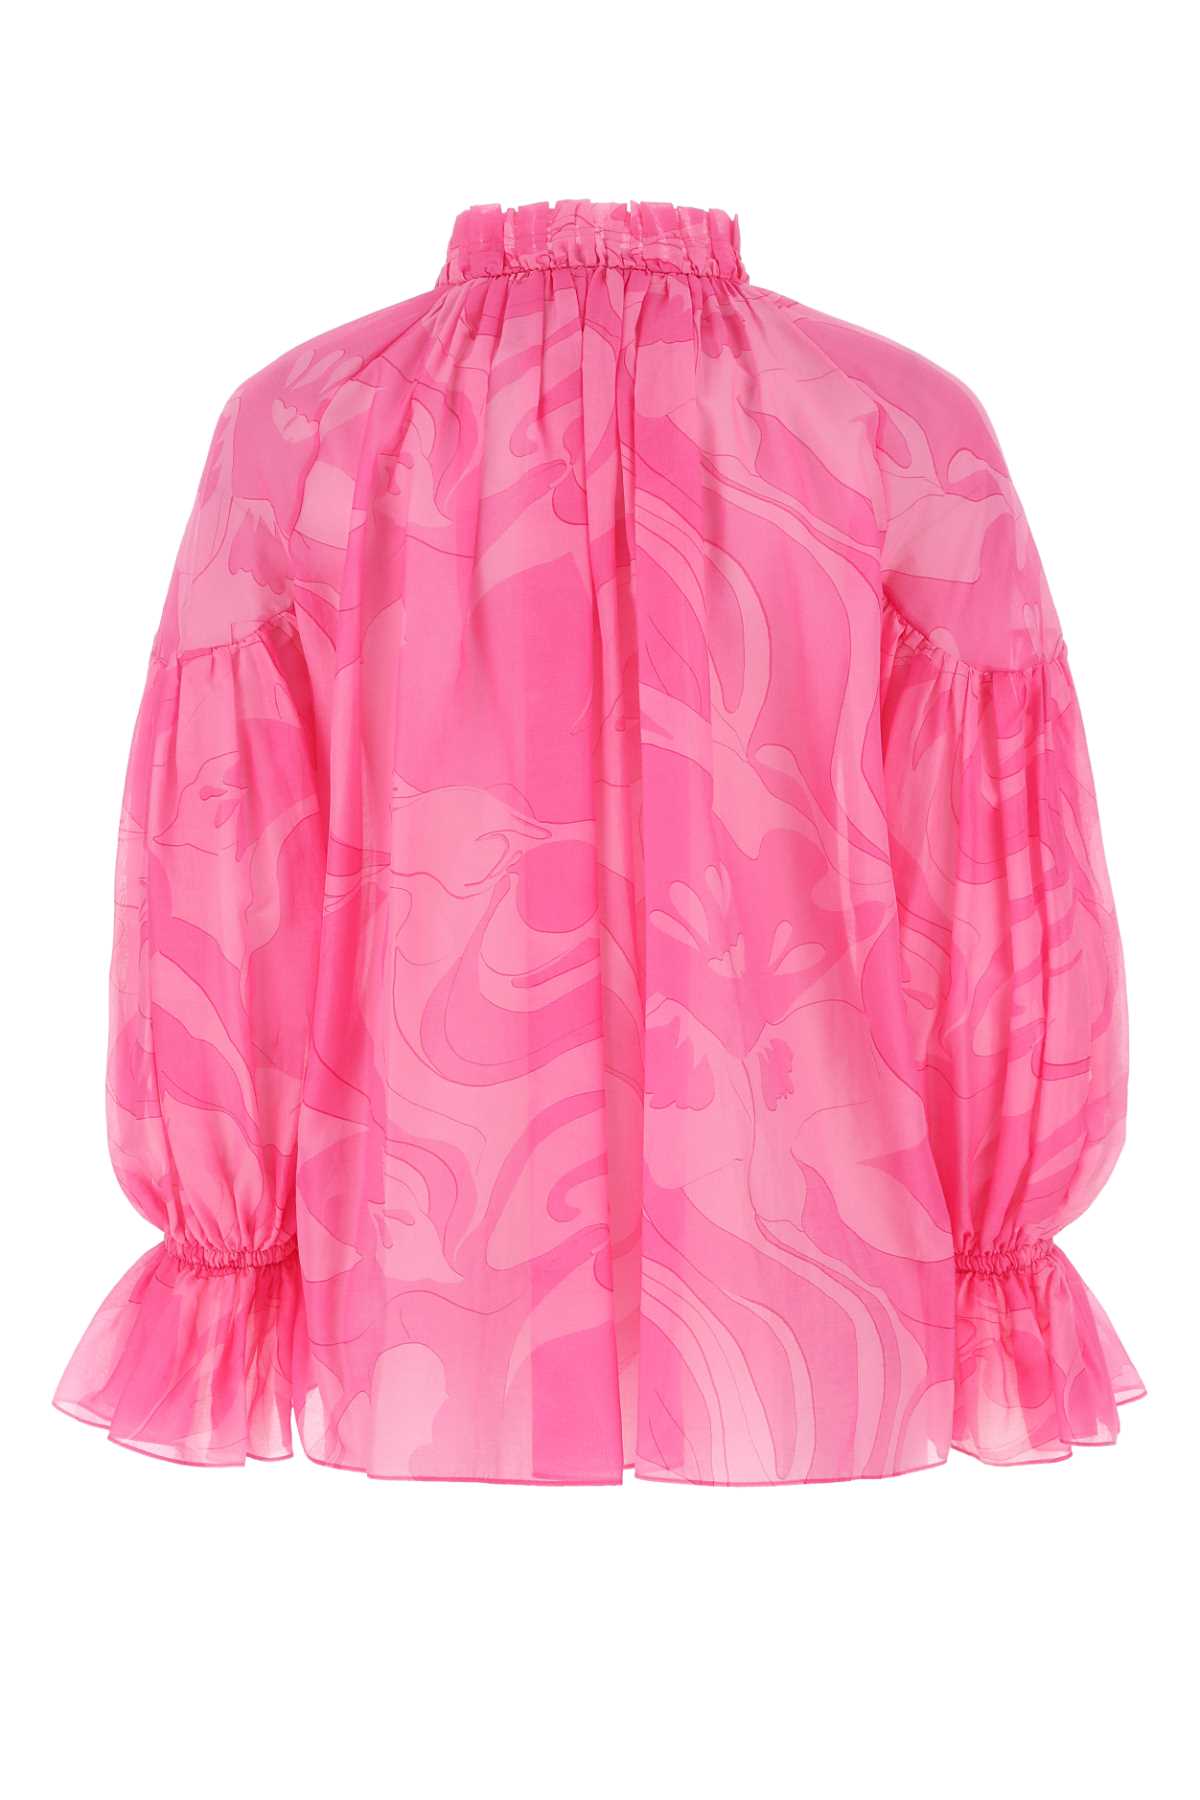 Etro Printed Voile Blouse In Pink